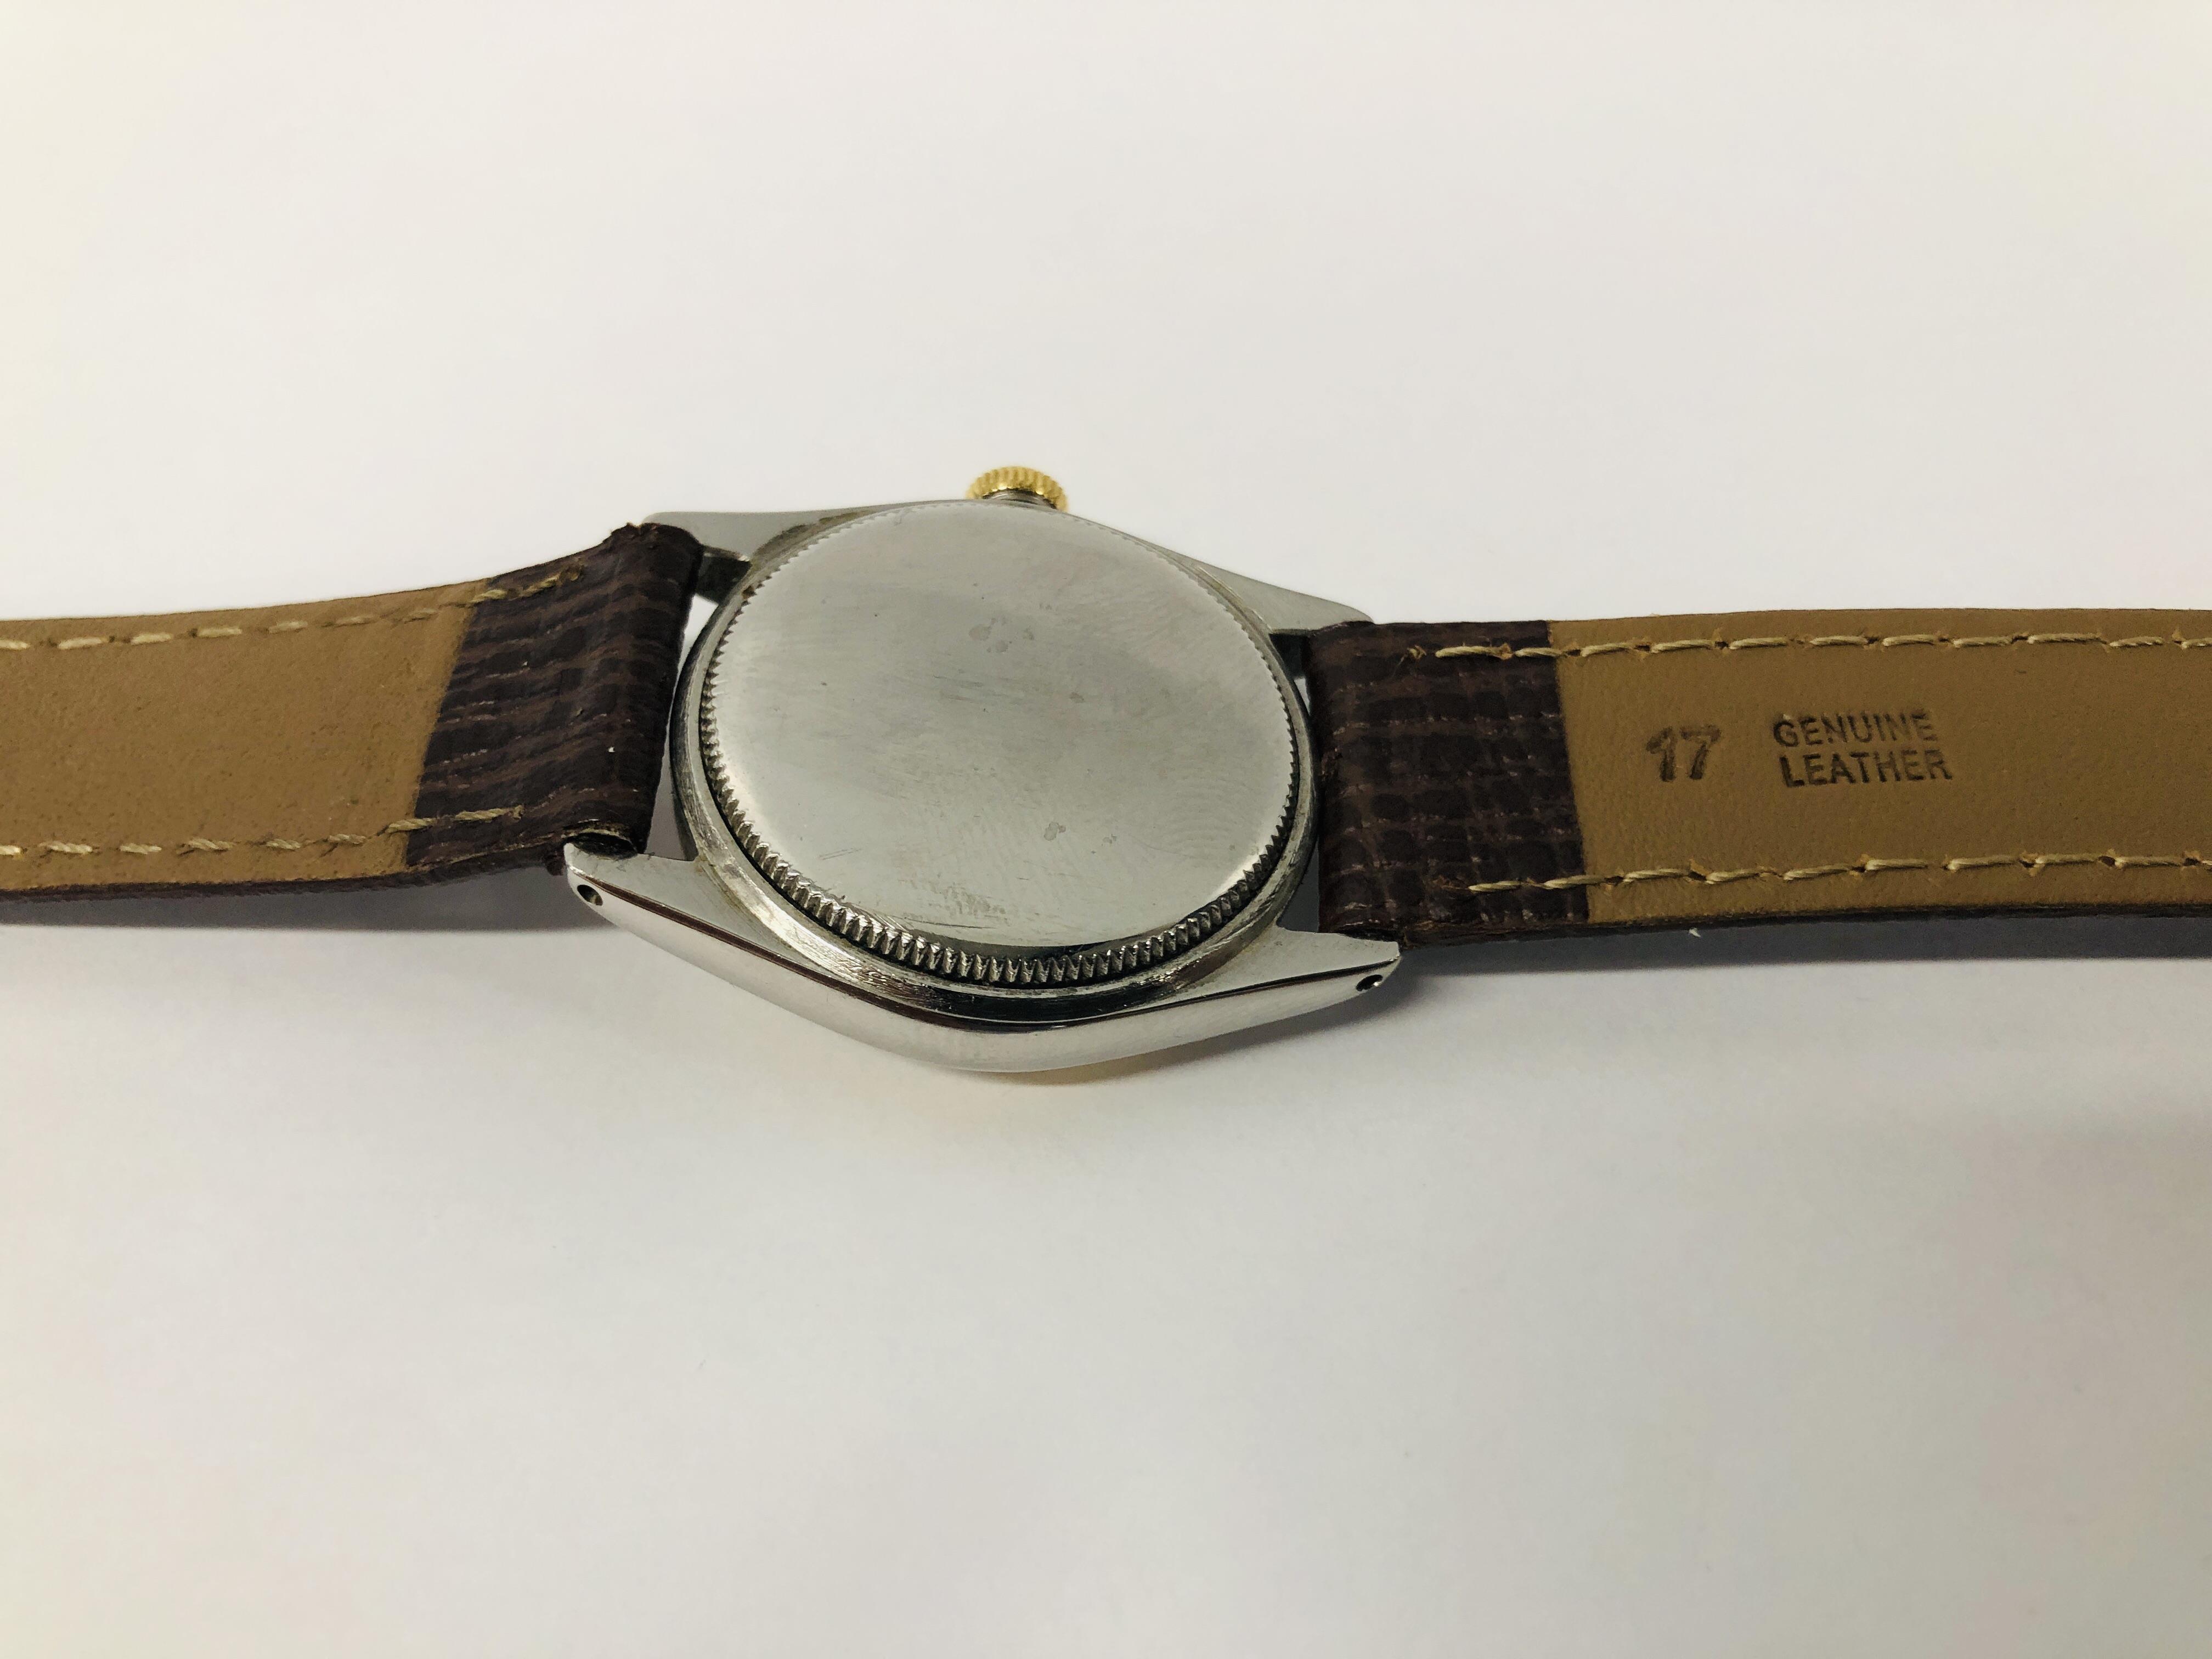 A VINTAGE CIRCA 1950 GENTLEMANS ROLEX OYSTER WRIST WATCH ON BROWN LEATHER REPLACEMENT STRAP. - Image 9 of 10